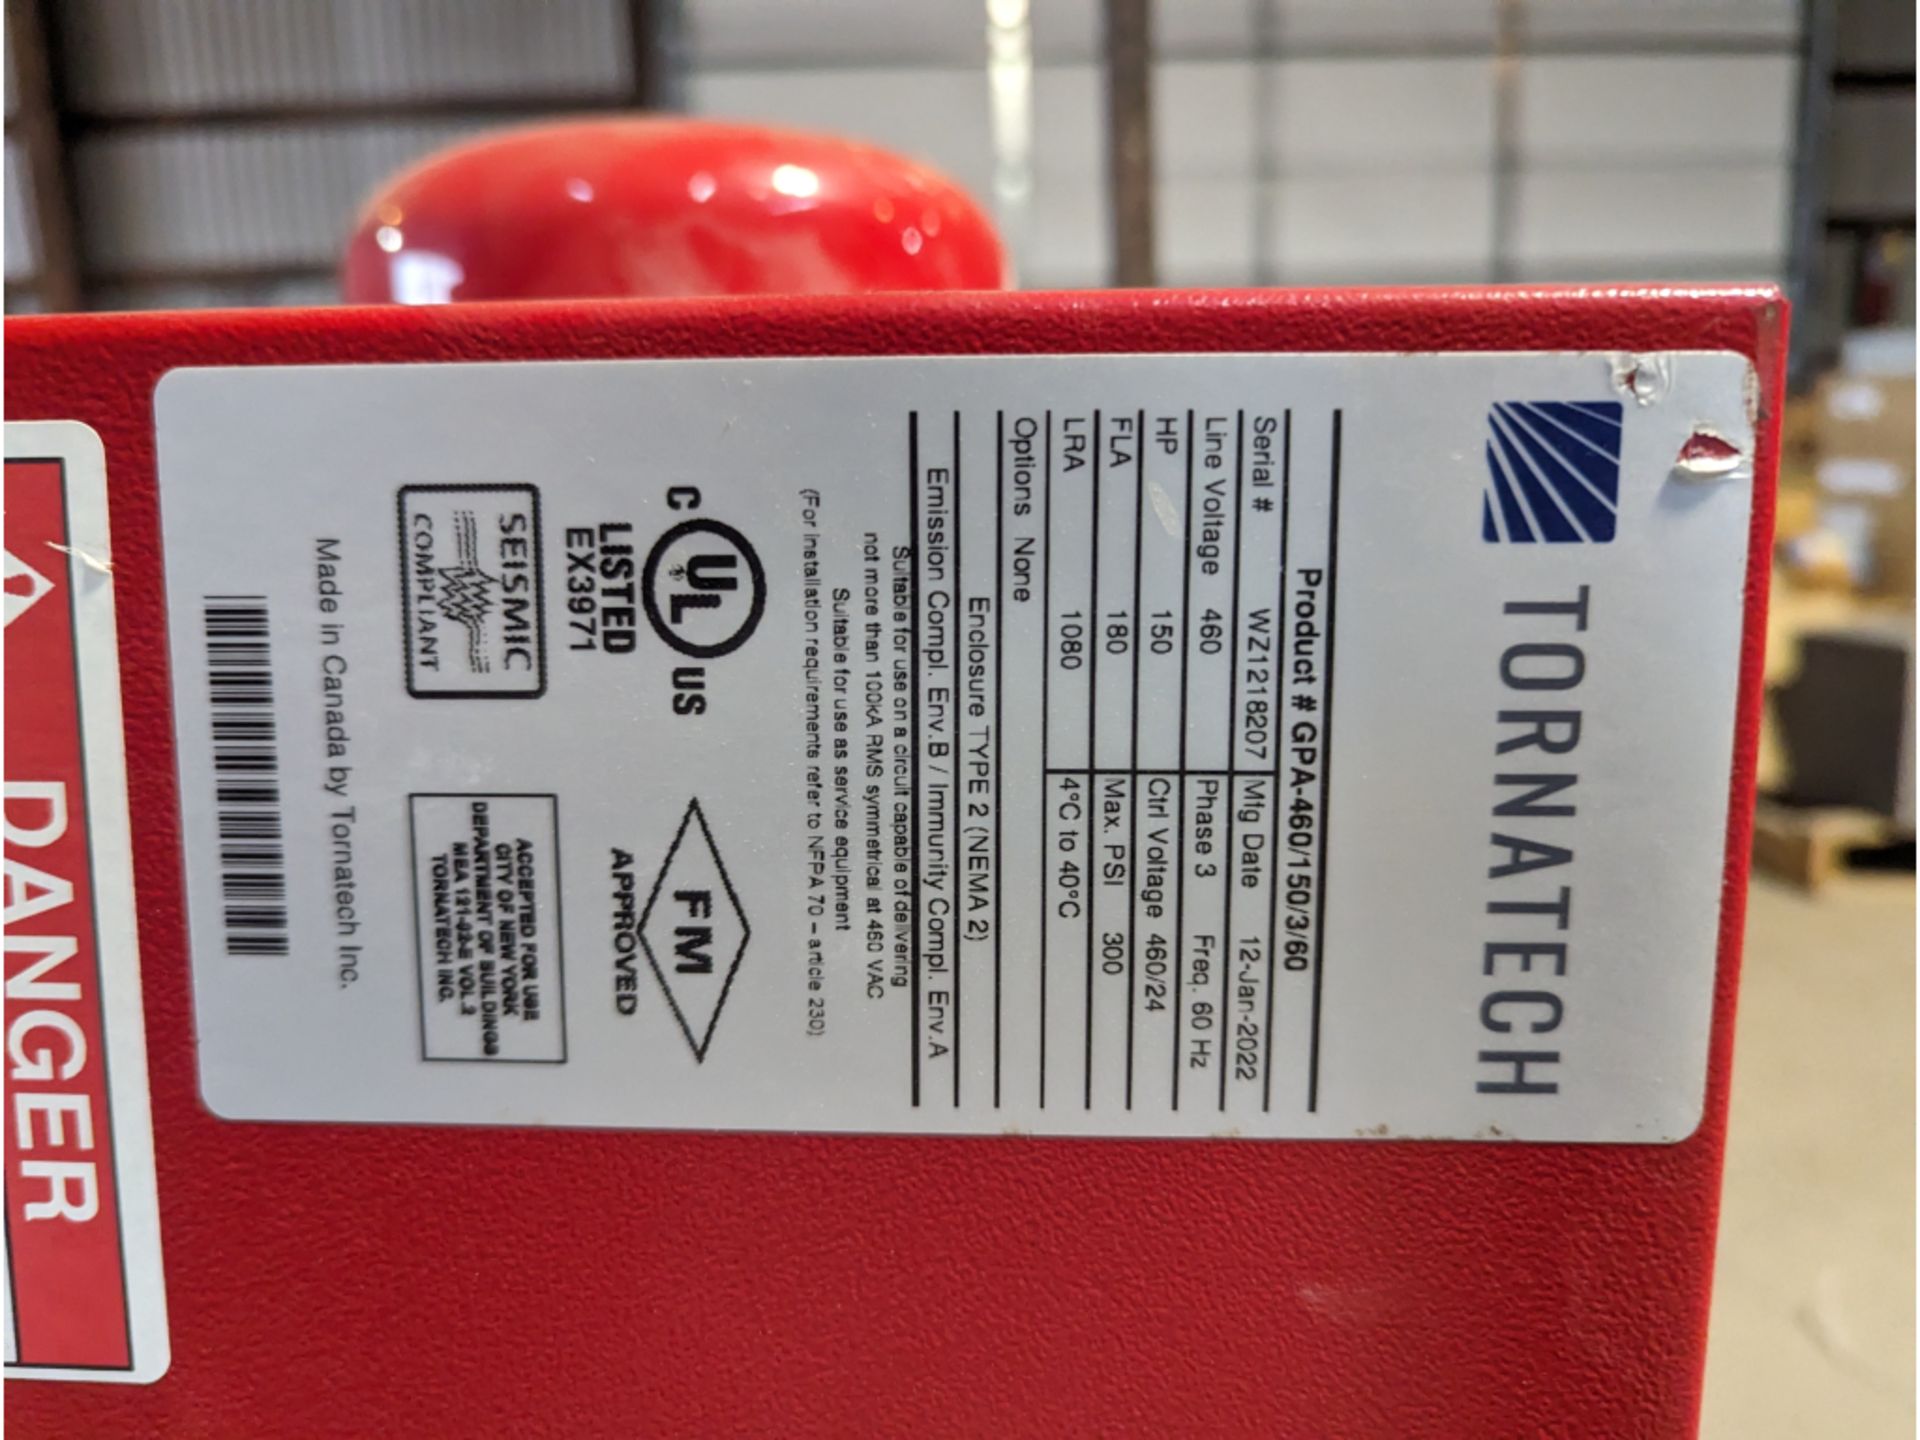 Tornatech Electric Fire Pump Controller - Image 3 of 7